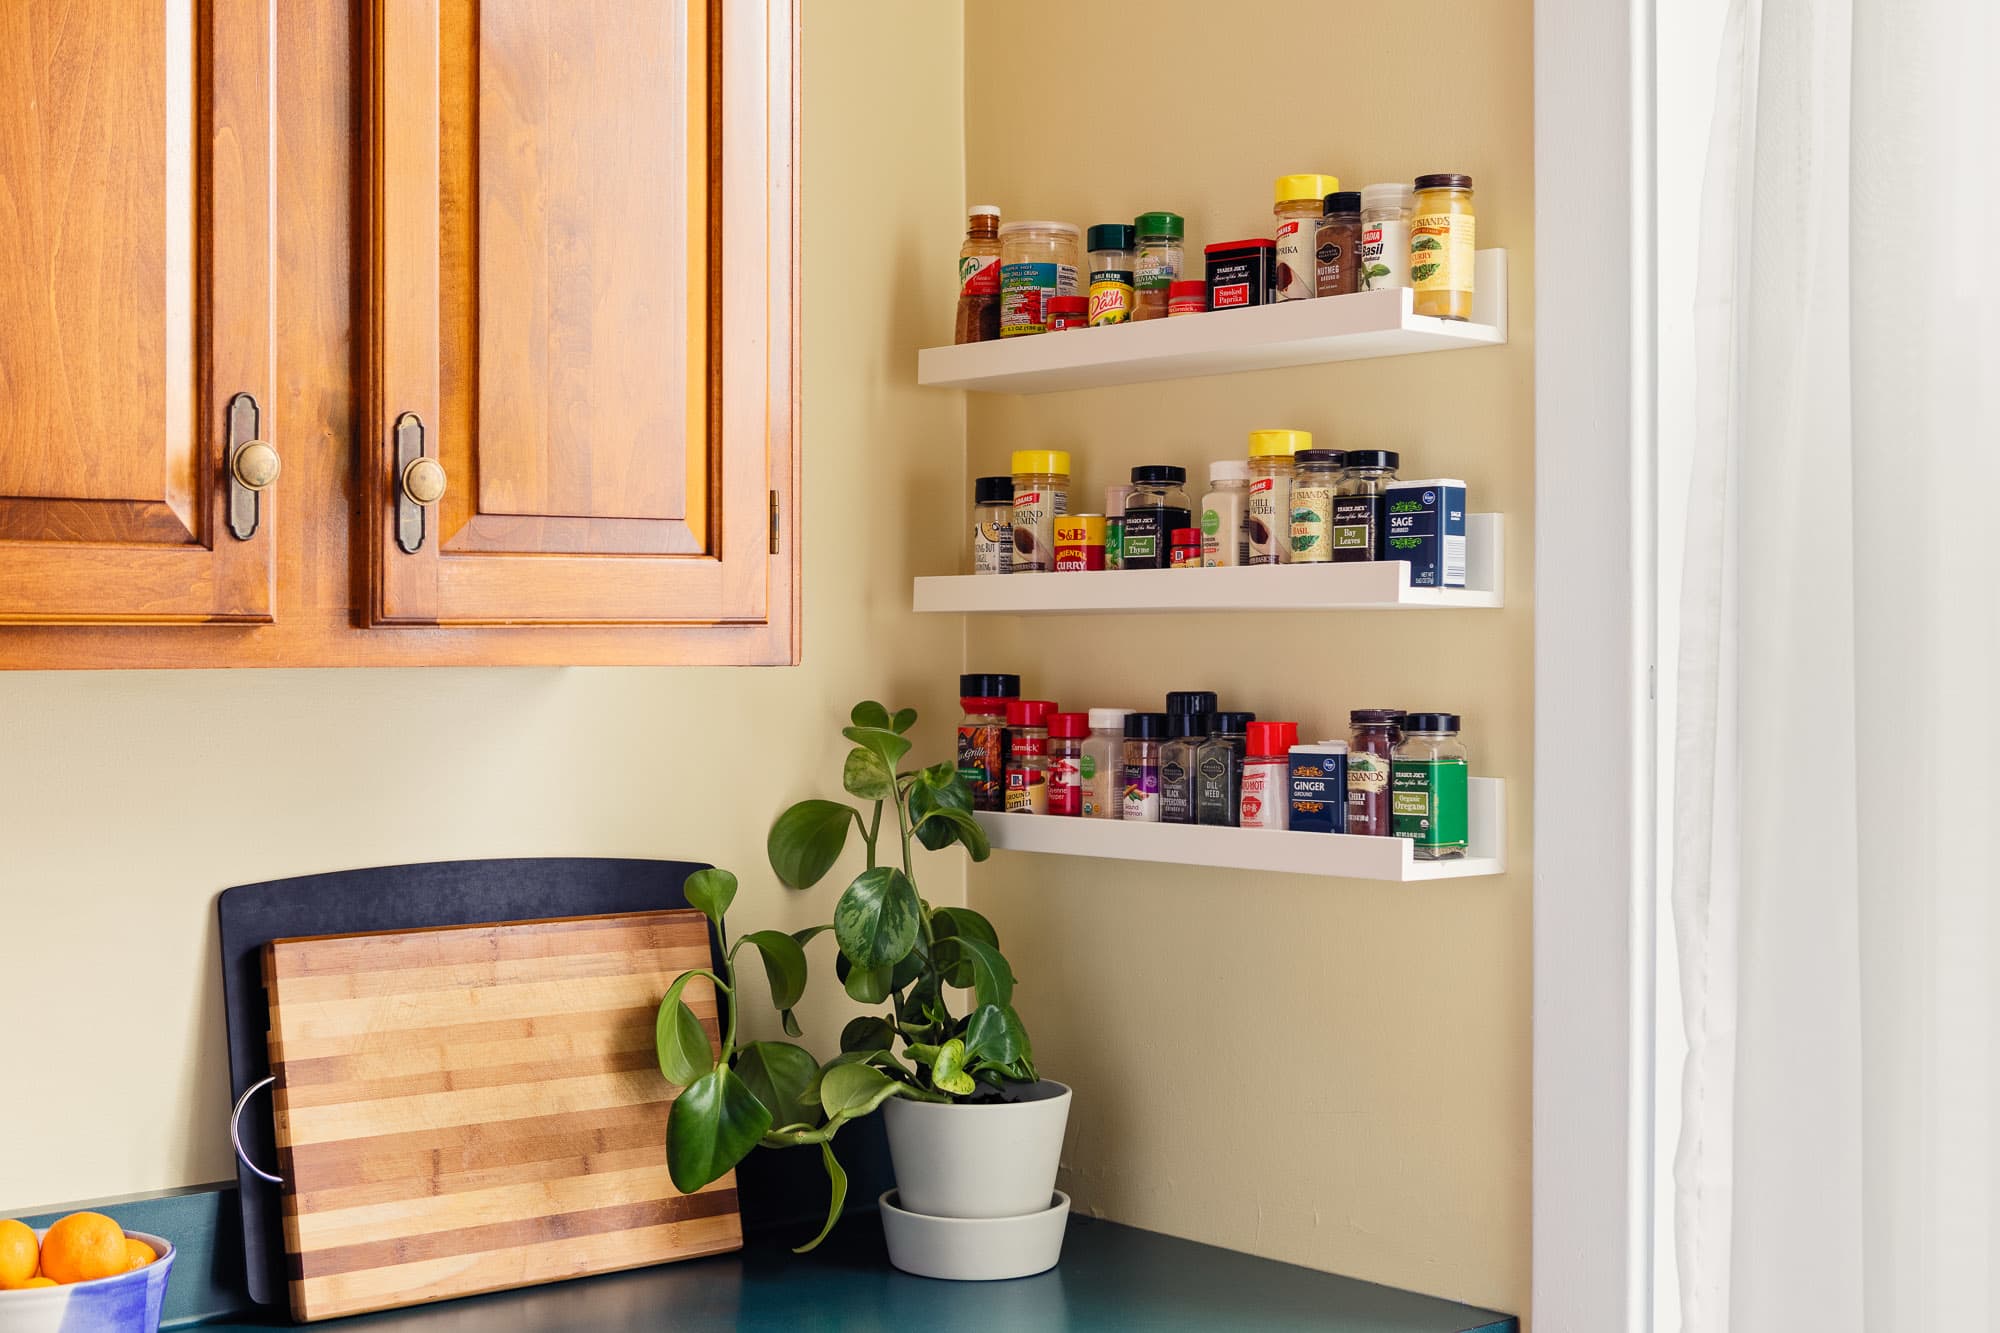 https://cdn.apartmenttherapy.info/image/upload/v1573827917/k/Photo/Lifestyle/2019-11-The-Easy-%2410-IKEA-Hack-That%E2%80%99ll-Get-All-Your-Spices-in-Order/Easy-Ikea-Hack-Spices-1.jpg